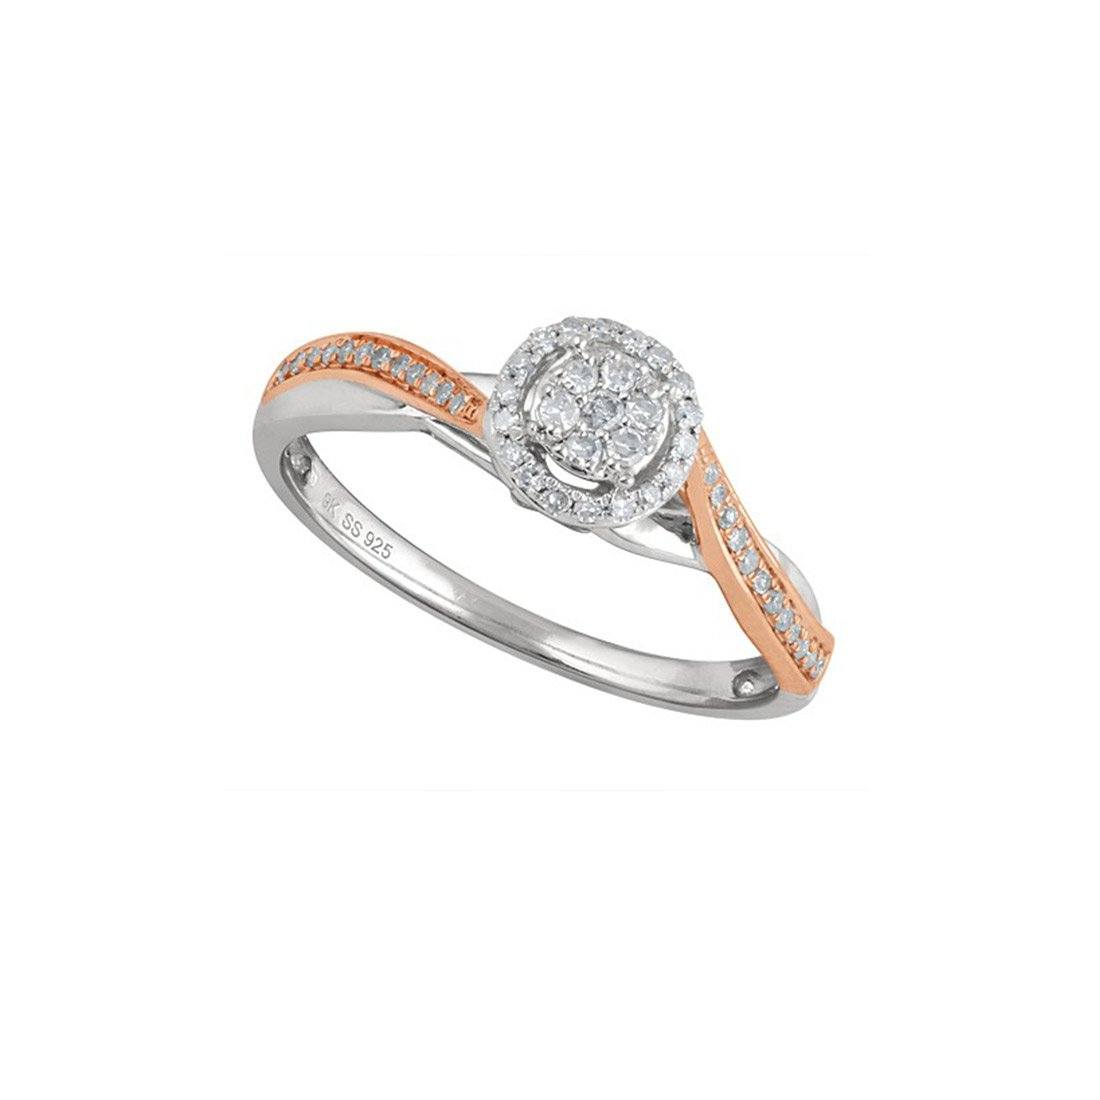 Brilliant Illusion Ring with 0.15ct of Diamonds in 9ct Rose Gold & Sterling Silver Rings Bevilles 